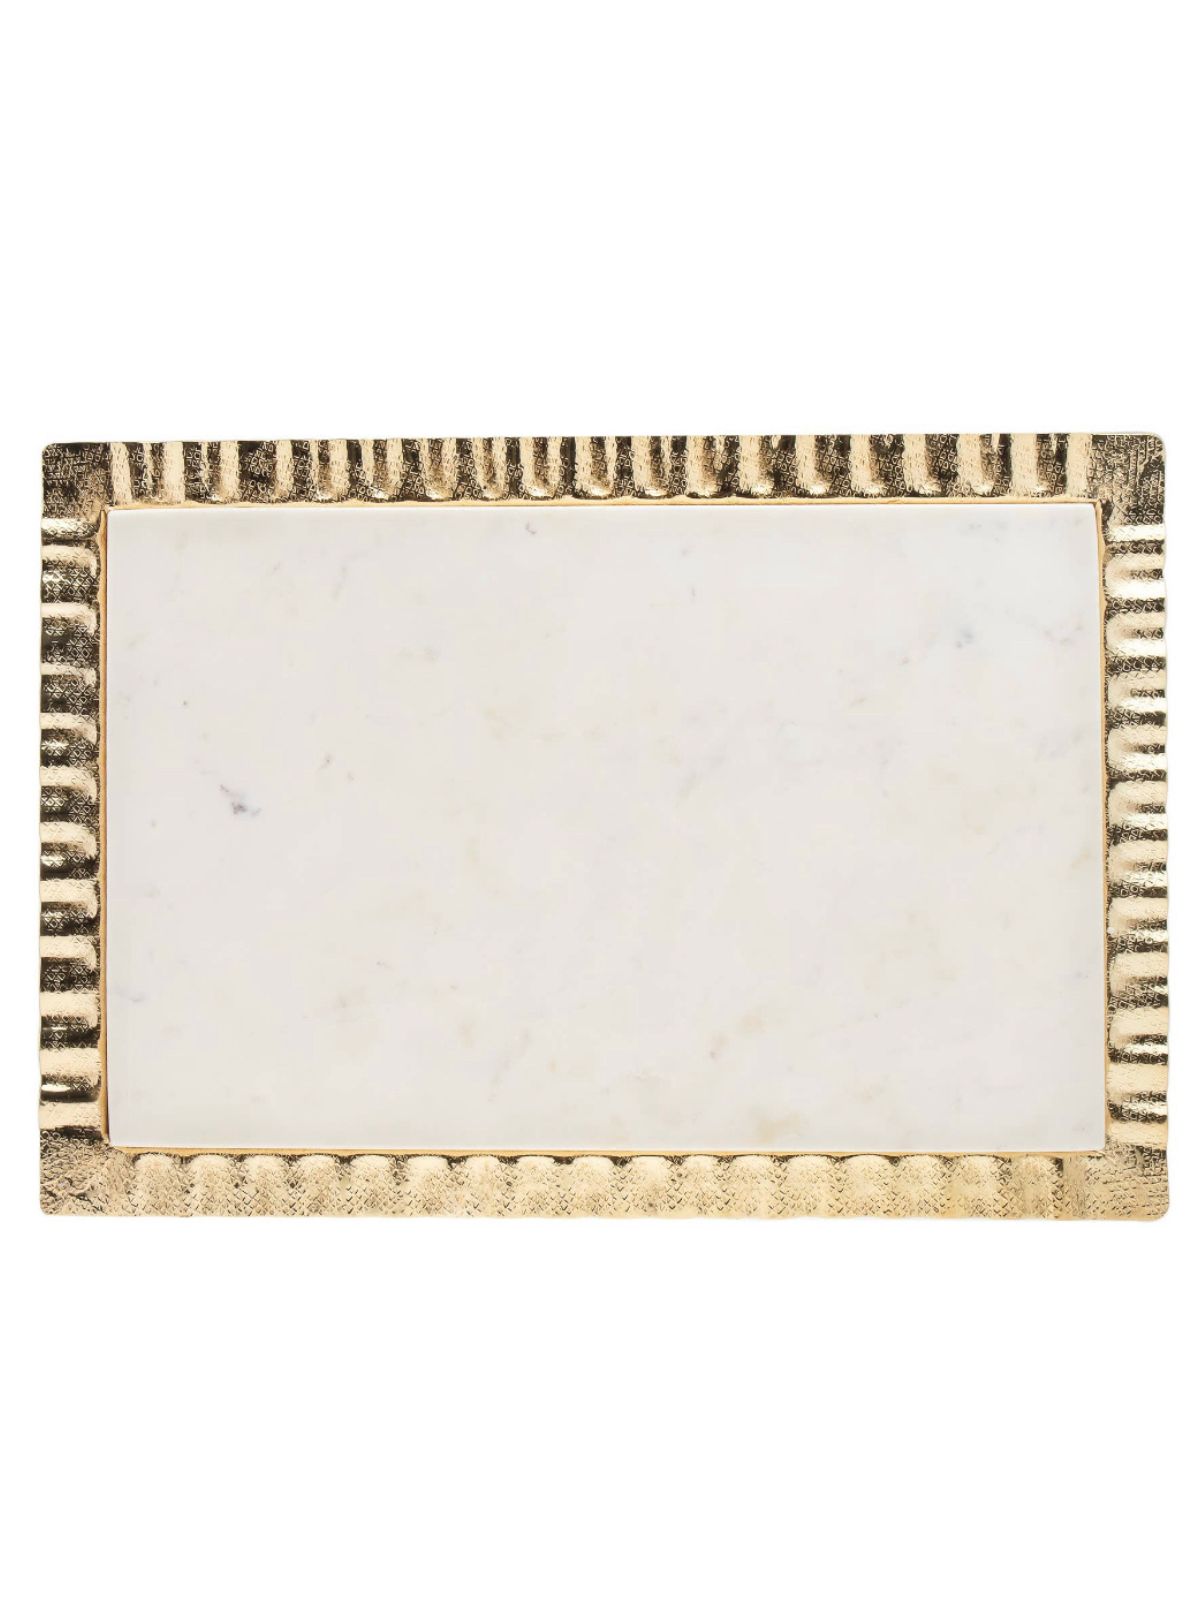 16L x 12W Luxurious White Marble Tray with Stainless Steel Gold Ripple Edges. 